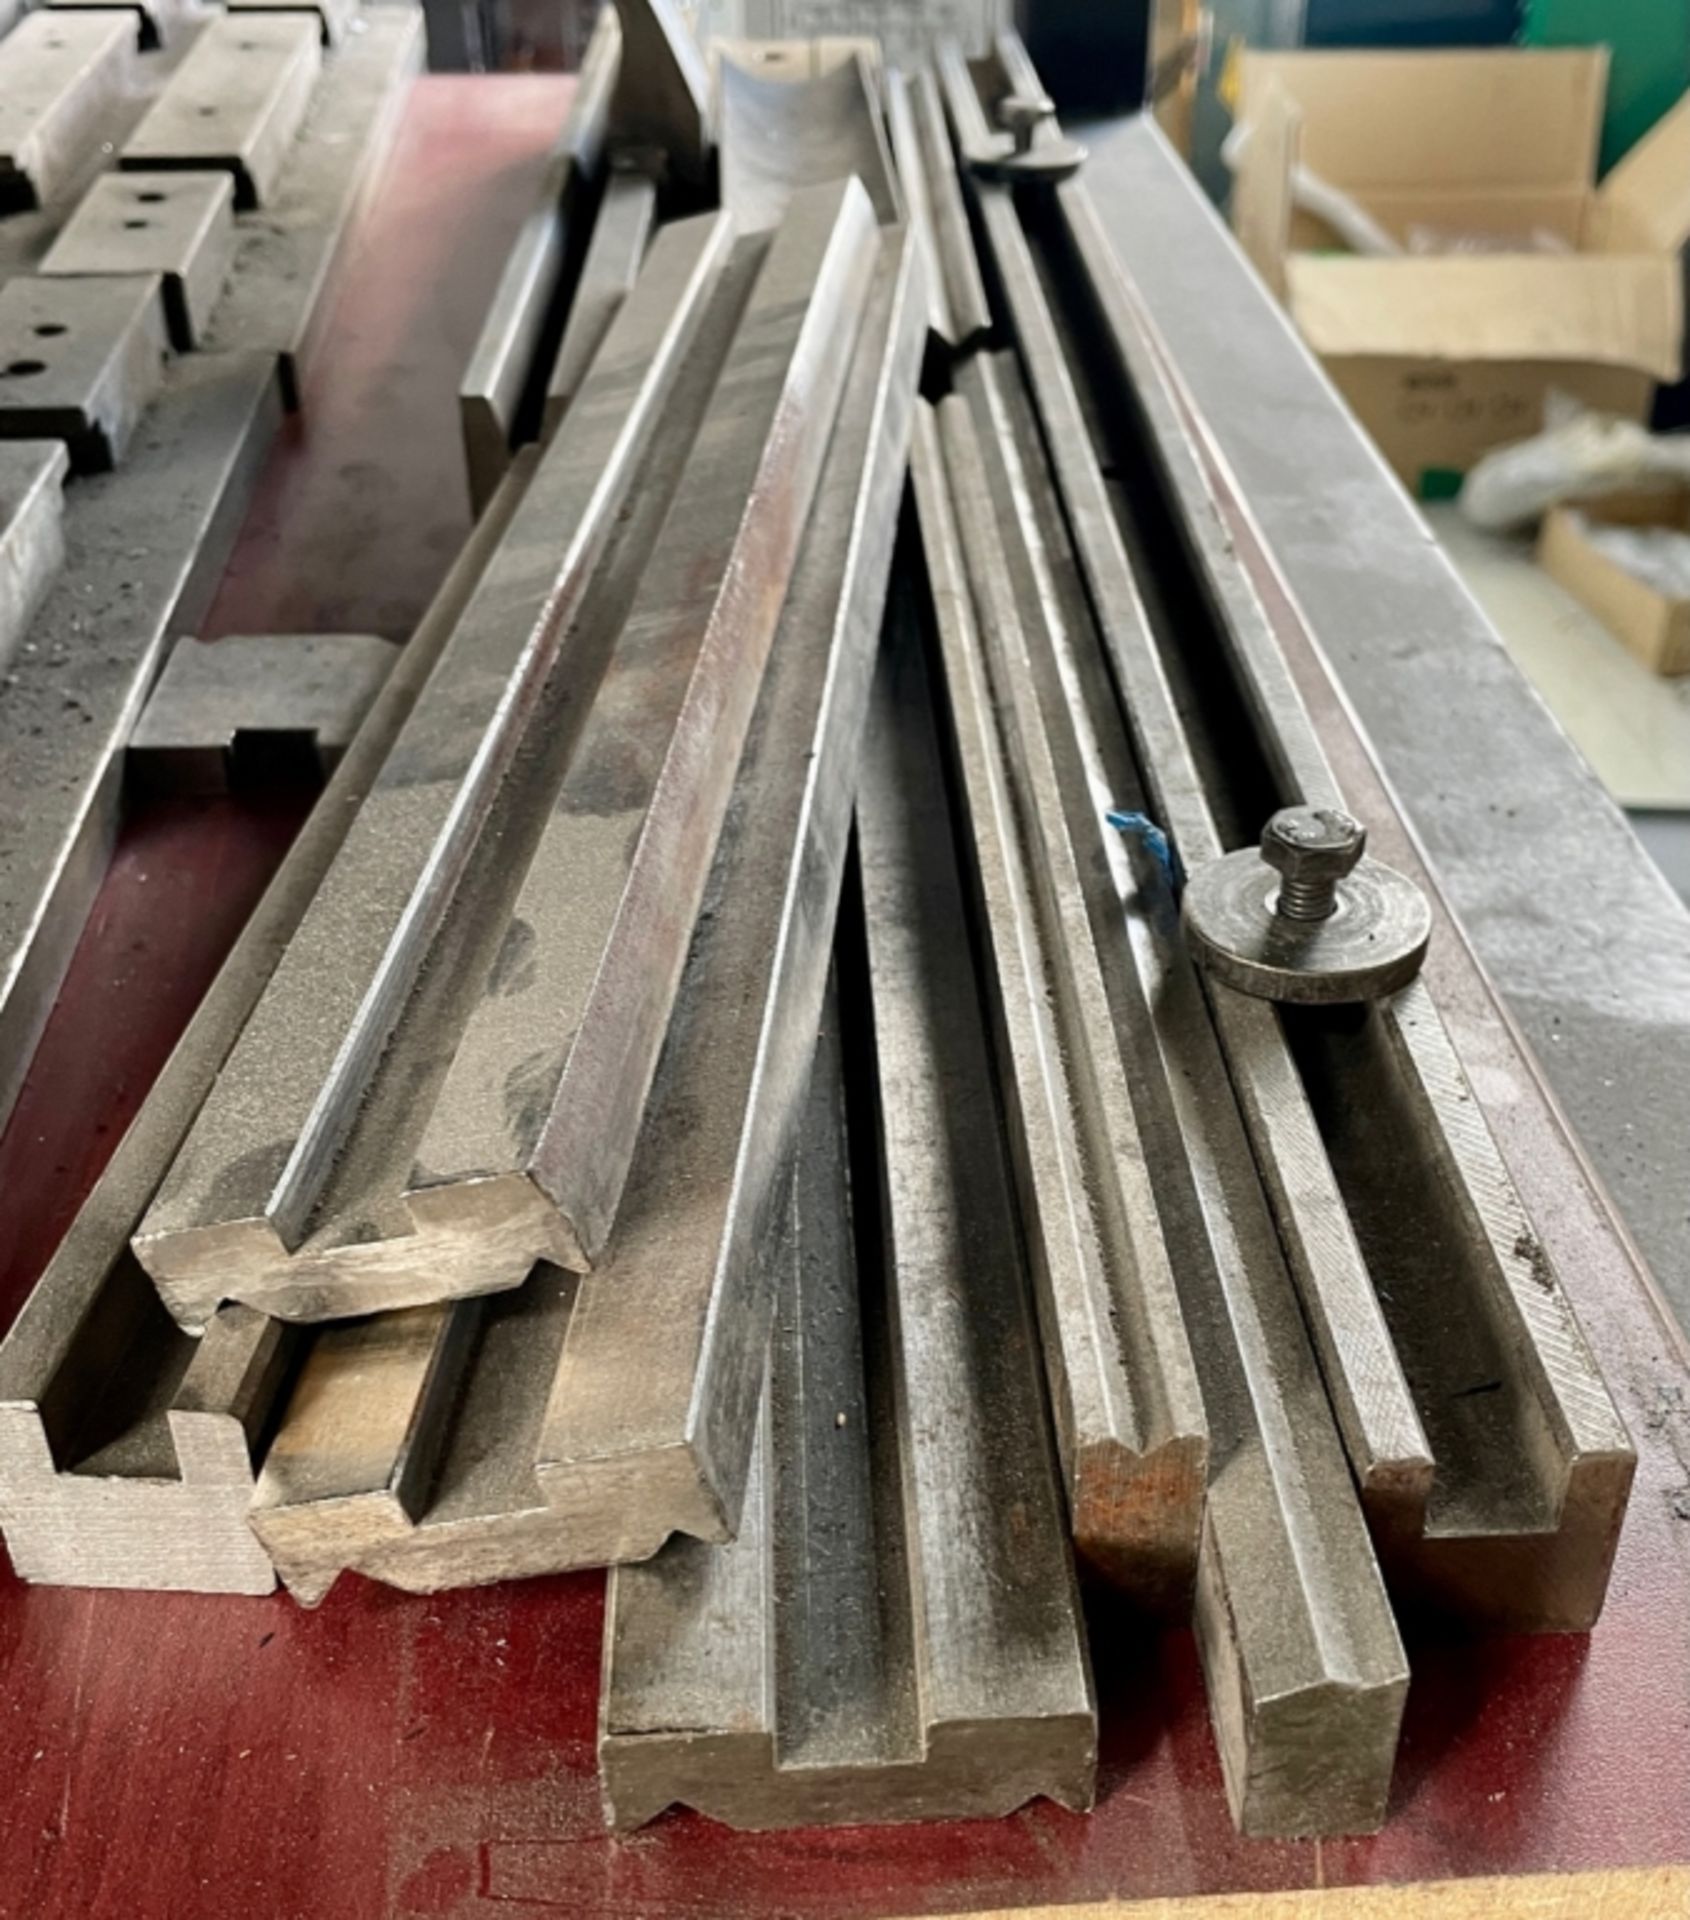 LOT OF DIES VARIOUS LENGTHS ** LOCATED IN VAUDREUIL QC **